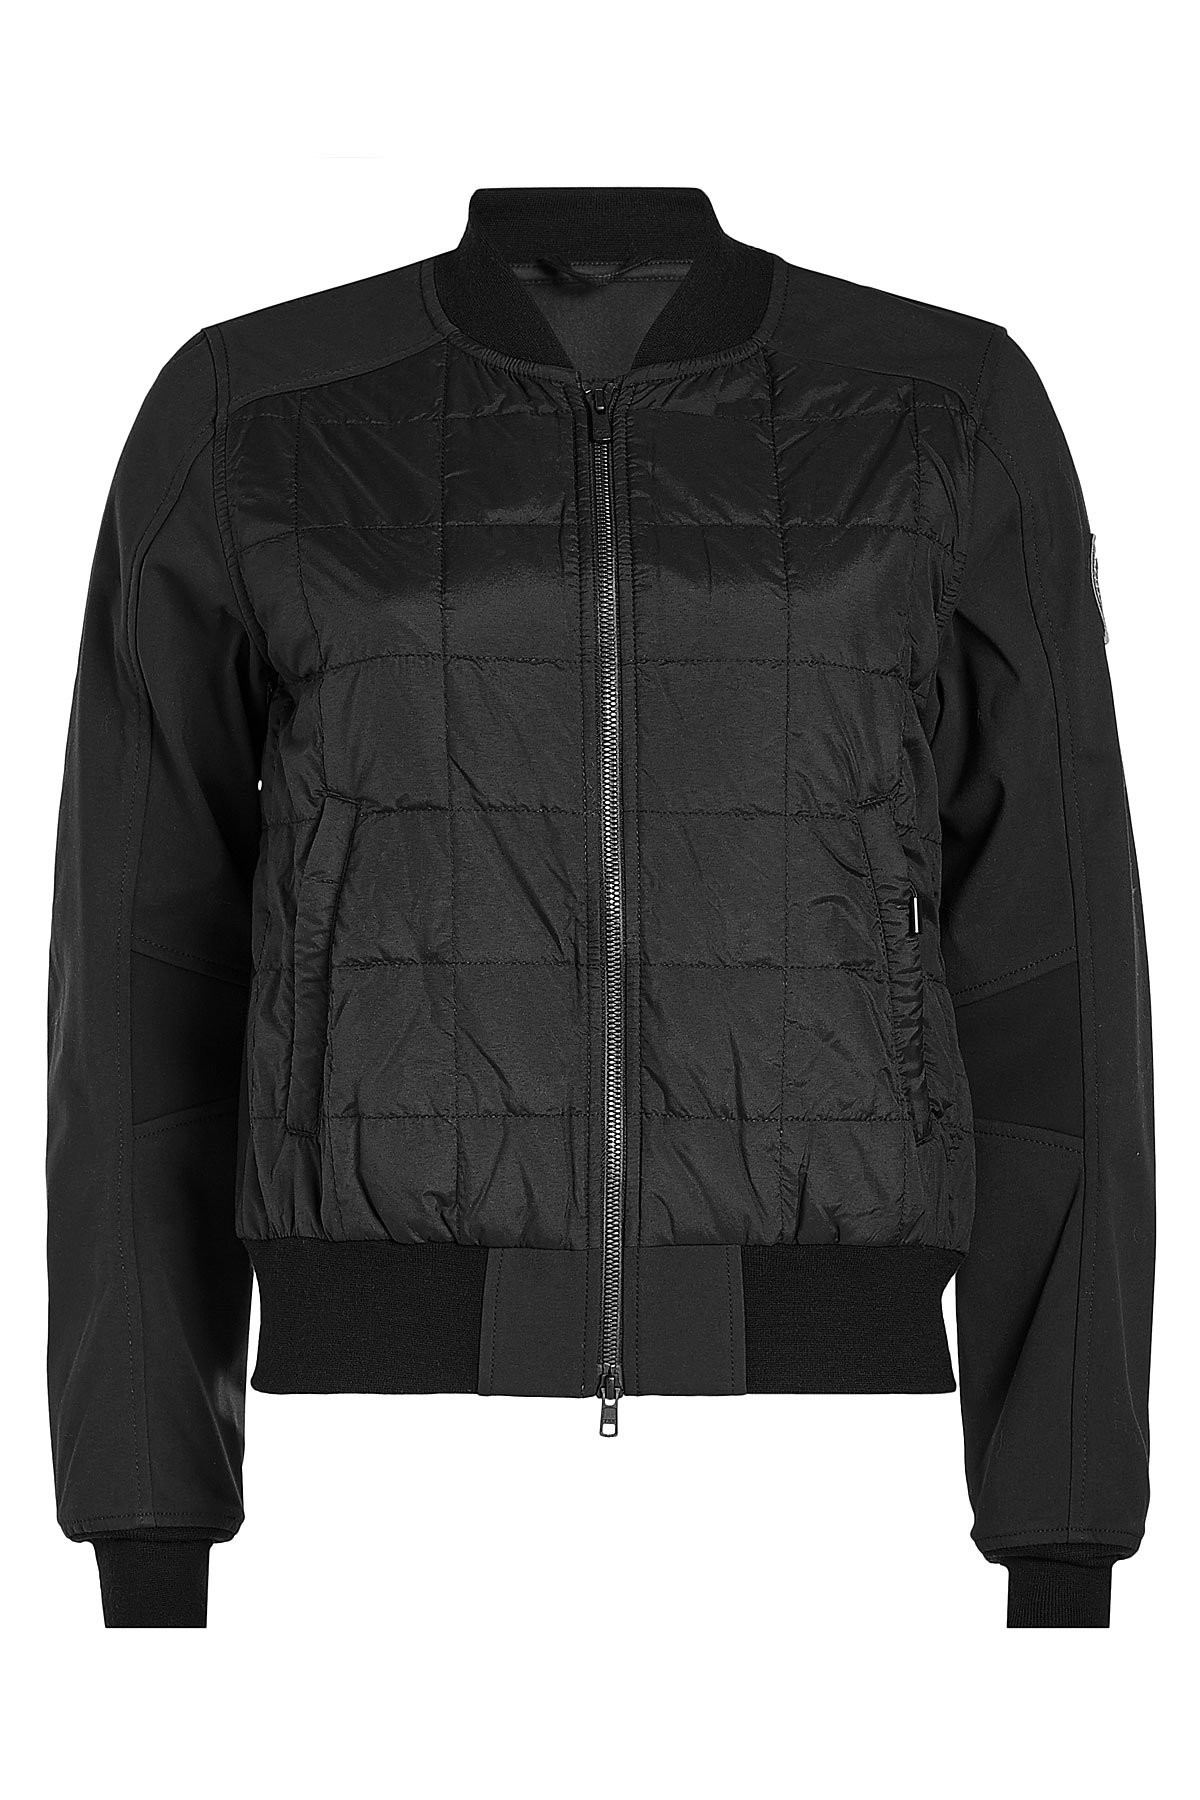 Hanley Down Bomber by Canada Goose